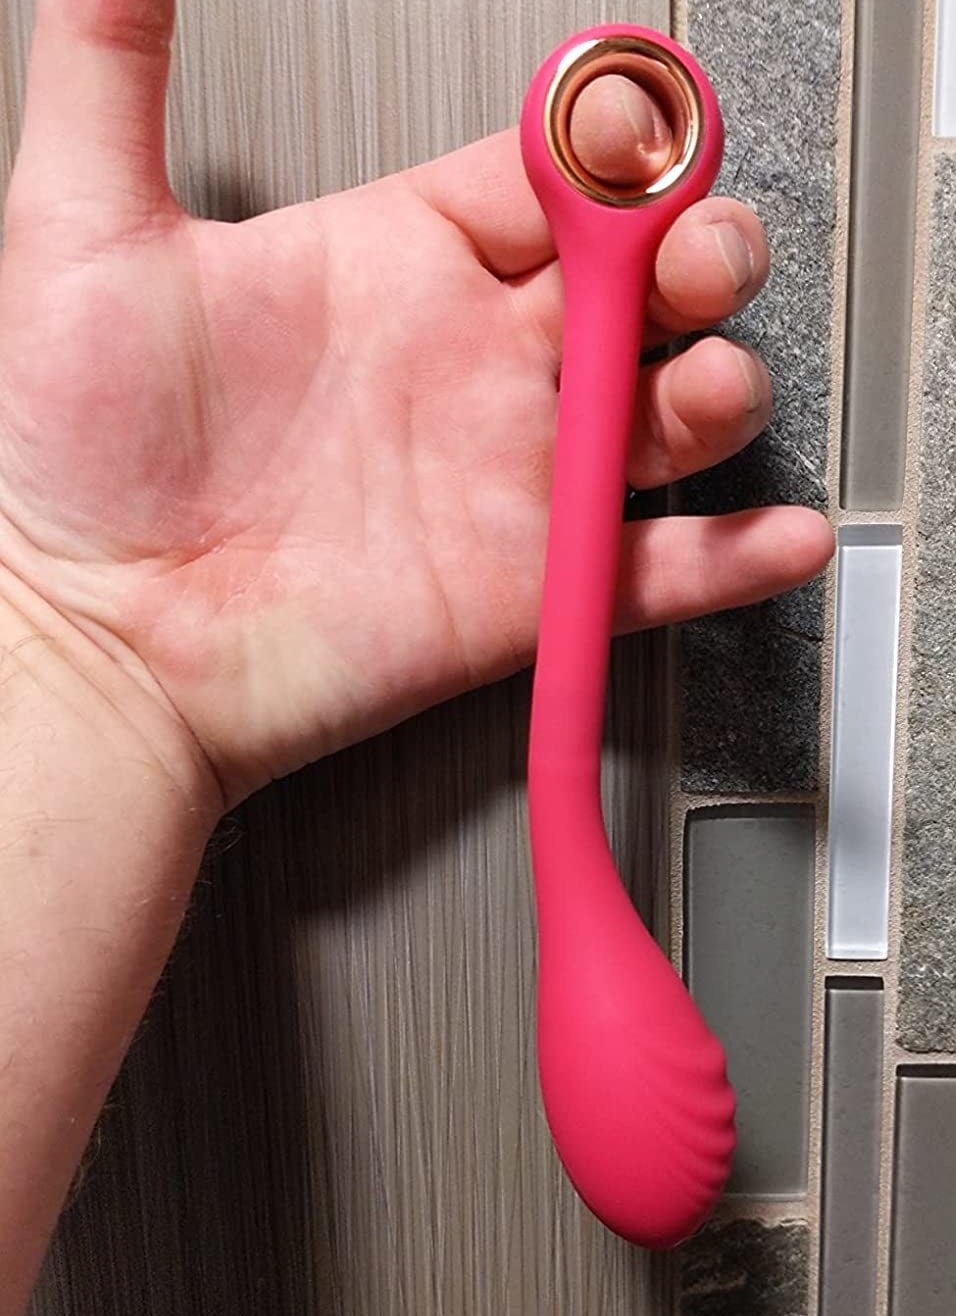 Reviewer holding pink vibrator